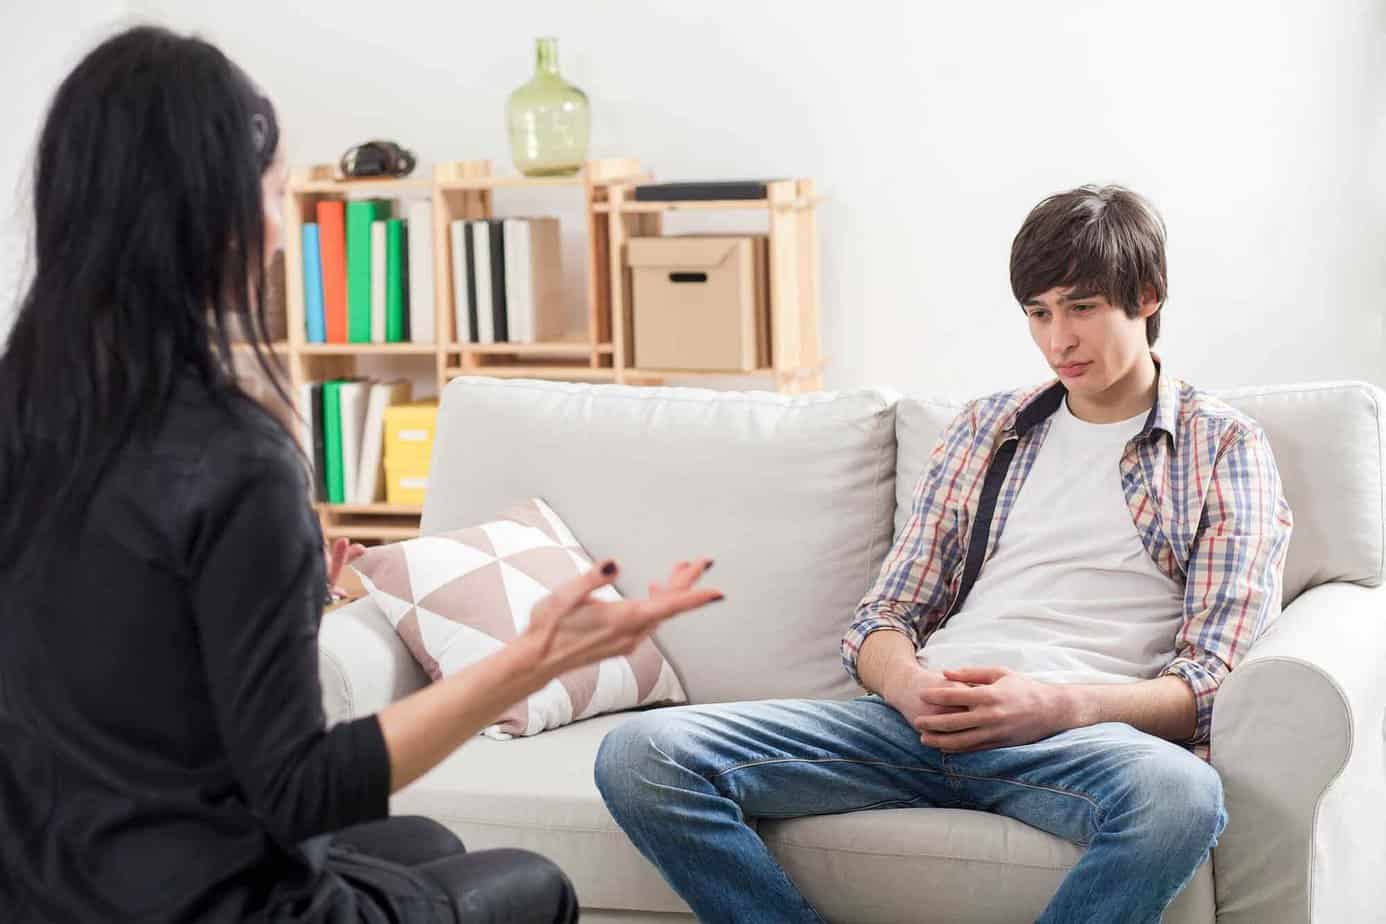 Female clinician and male teen in addiction treatment during an individual counseling session